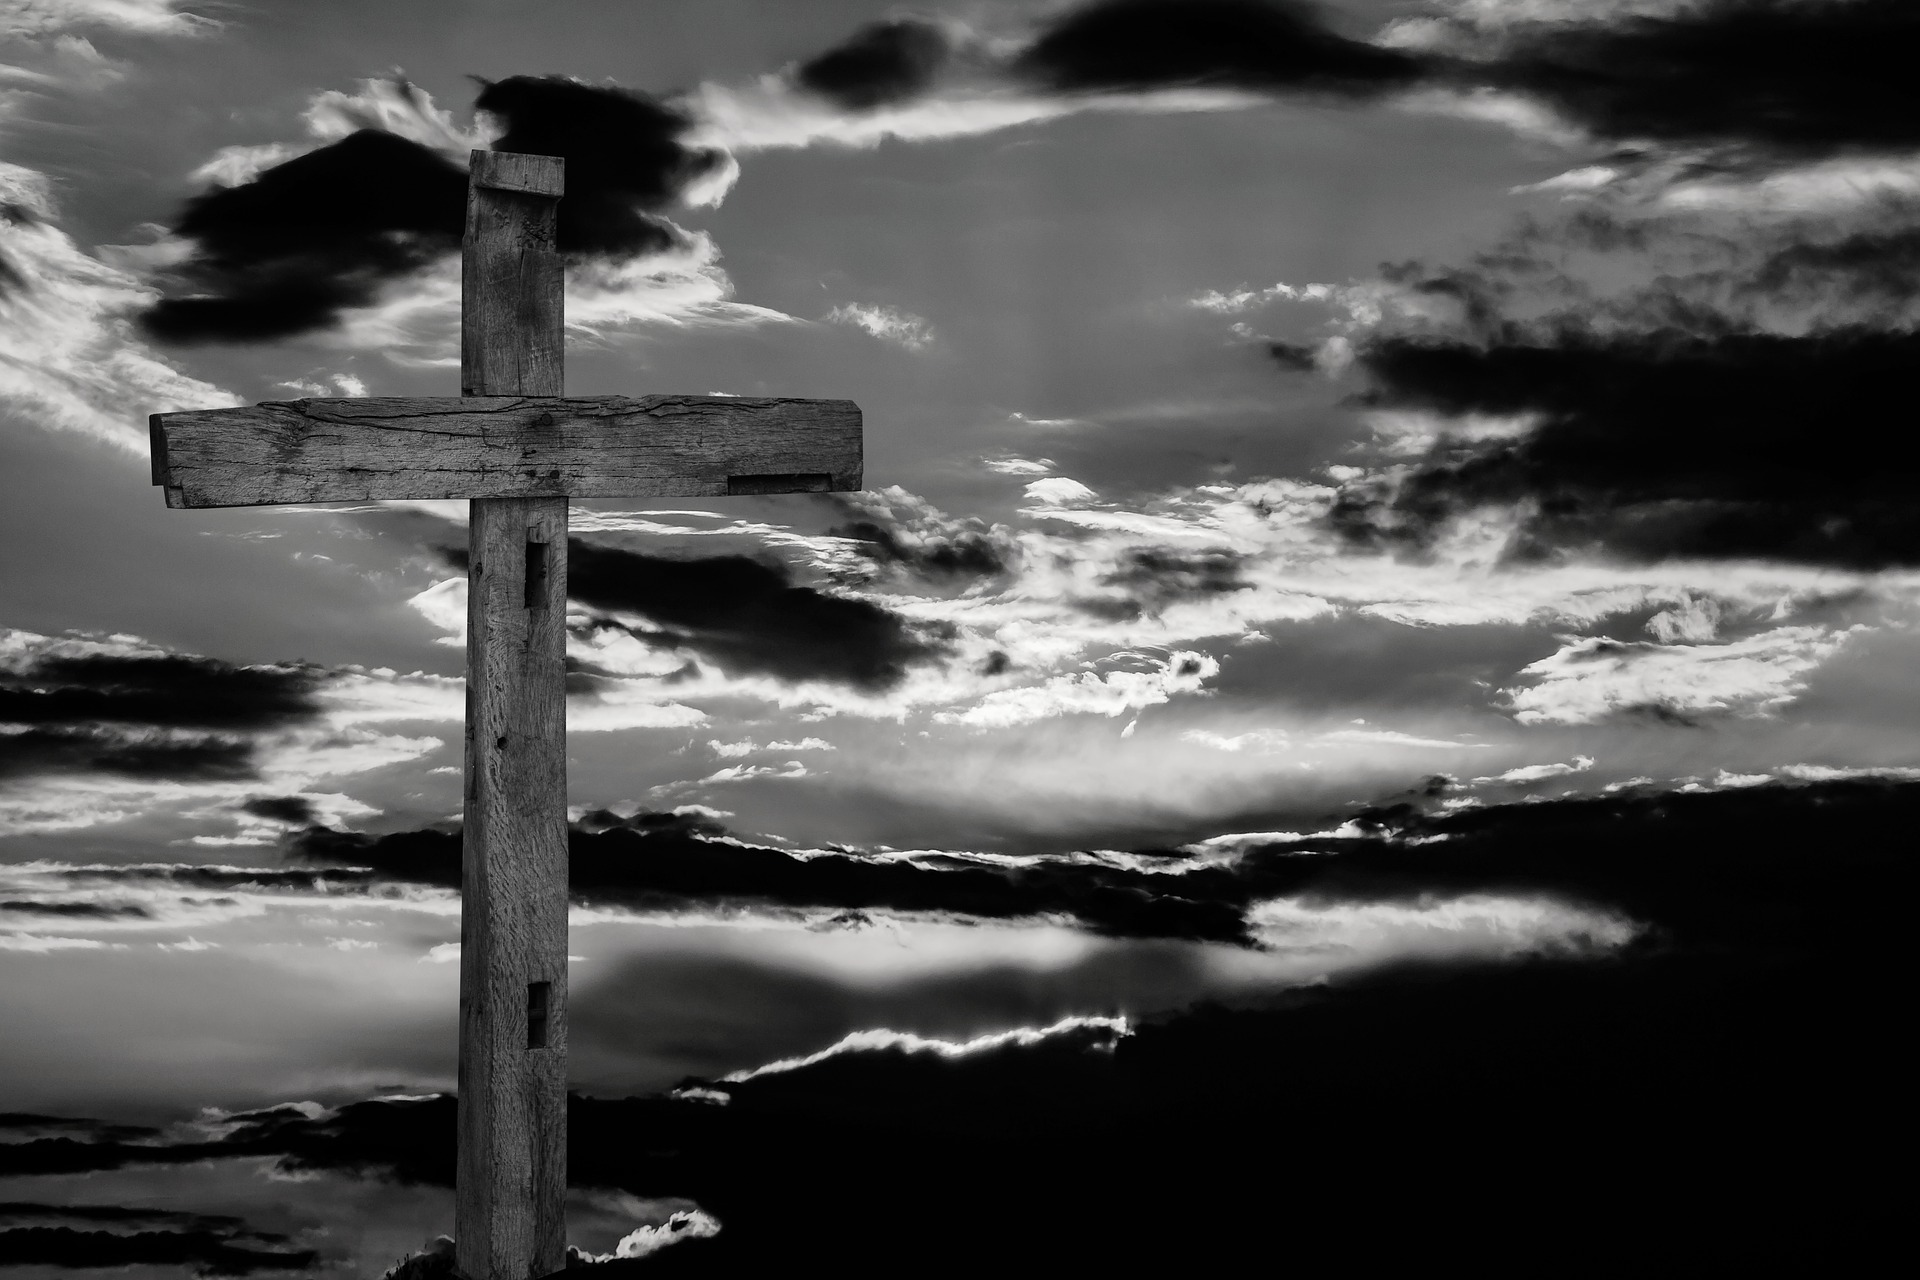 The cross is a symbol of Christianity